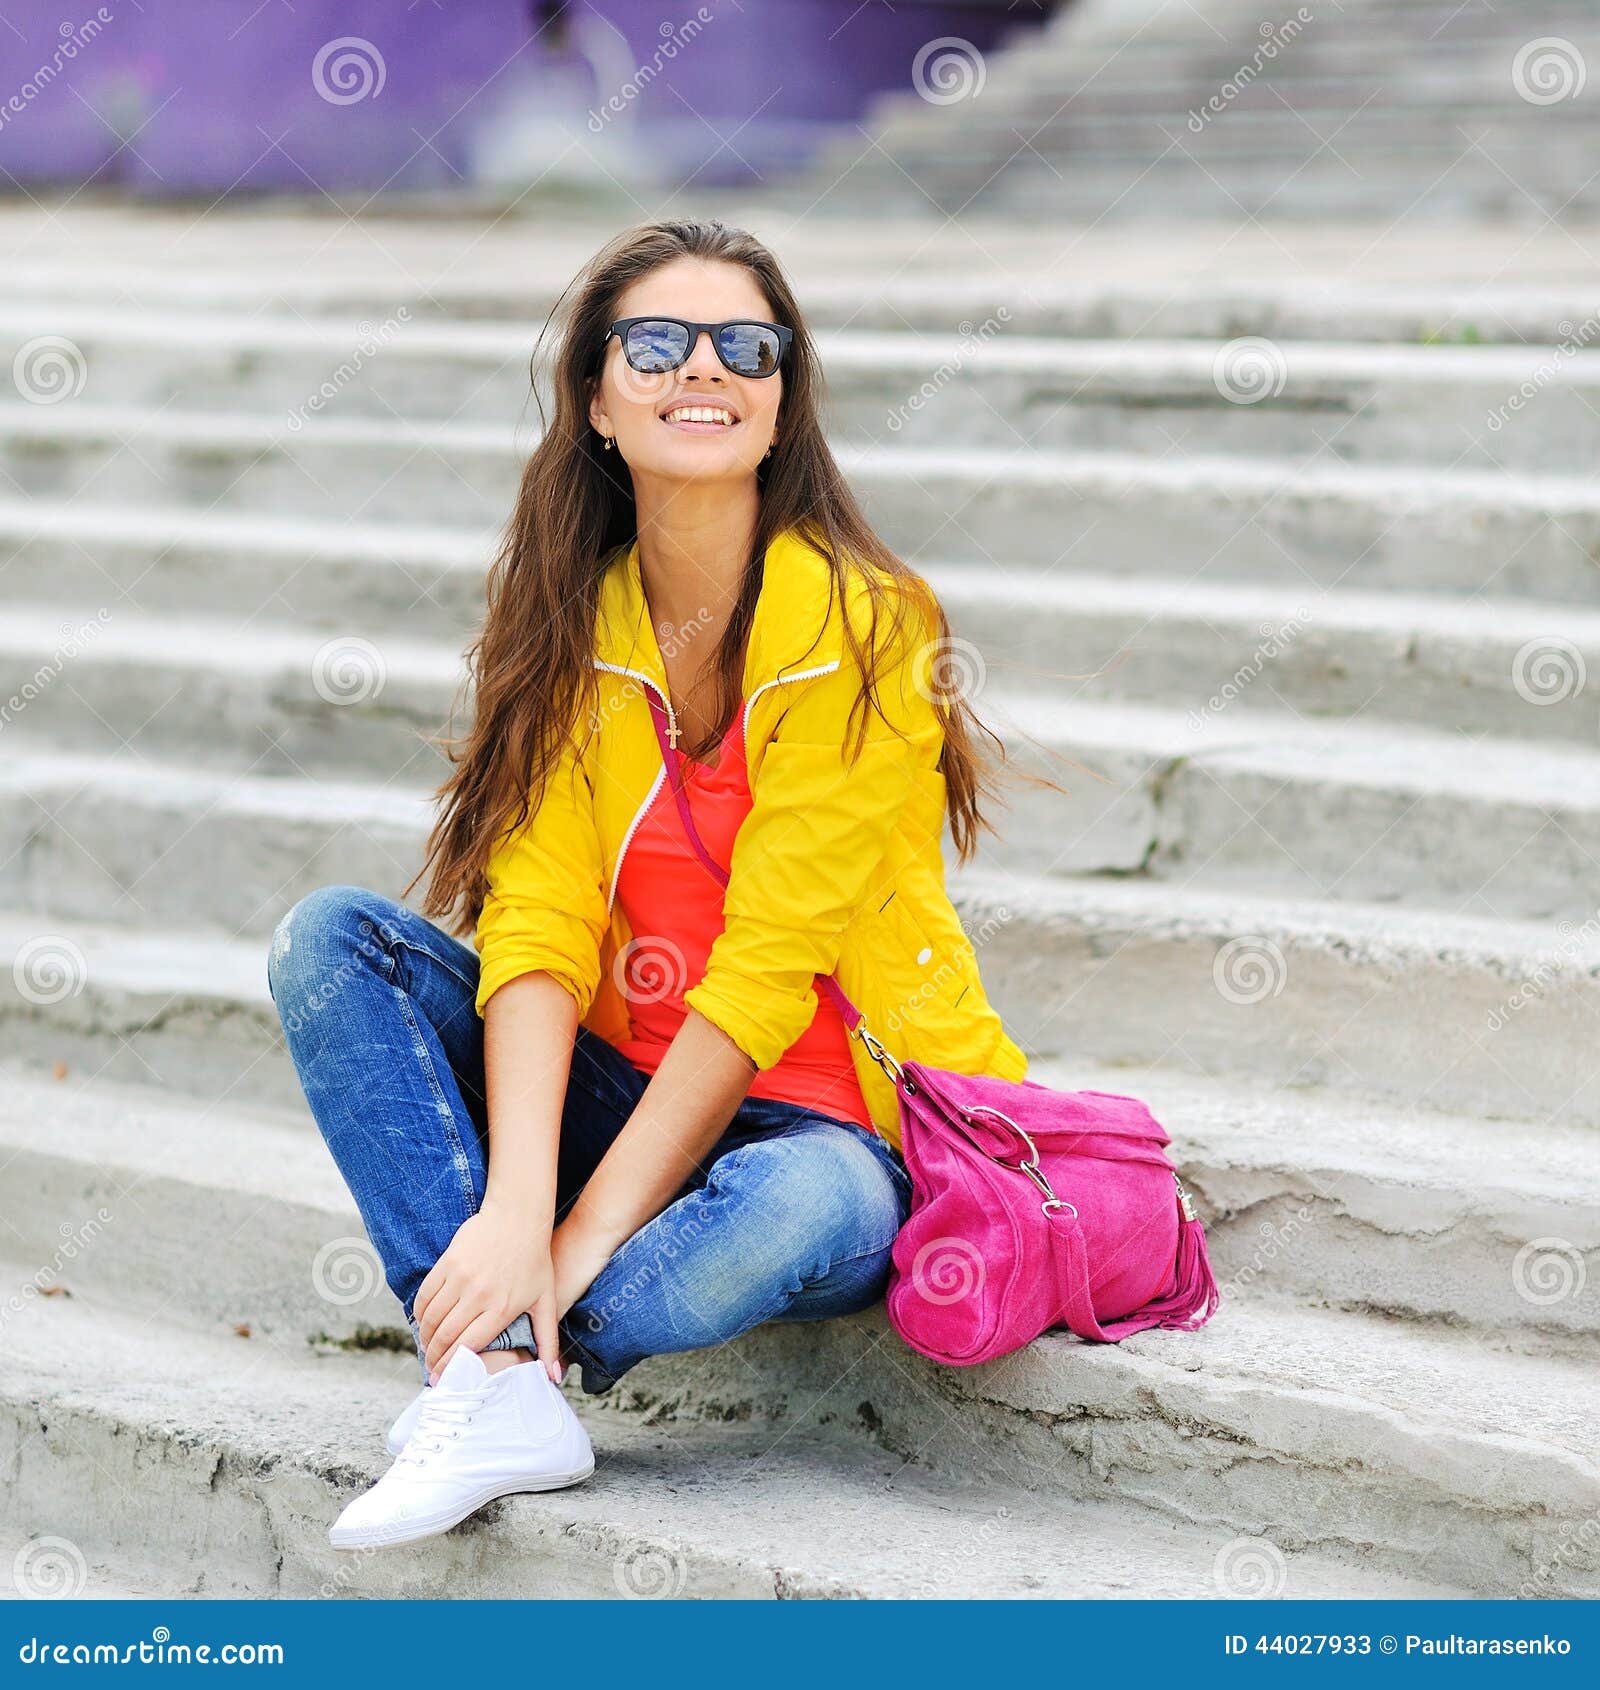 Young Casual Woman in Colorful Clothes Outdoor Portrait Stock Image ...